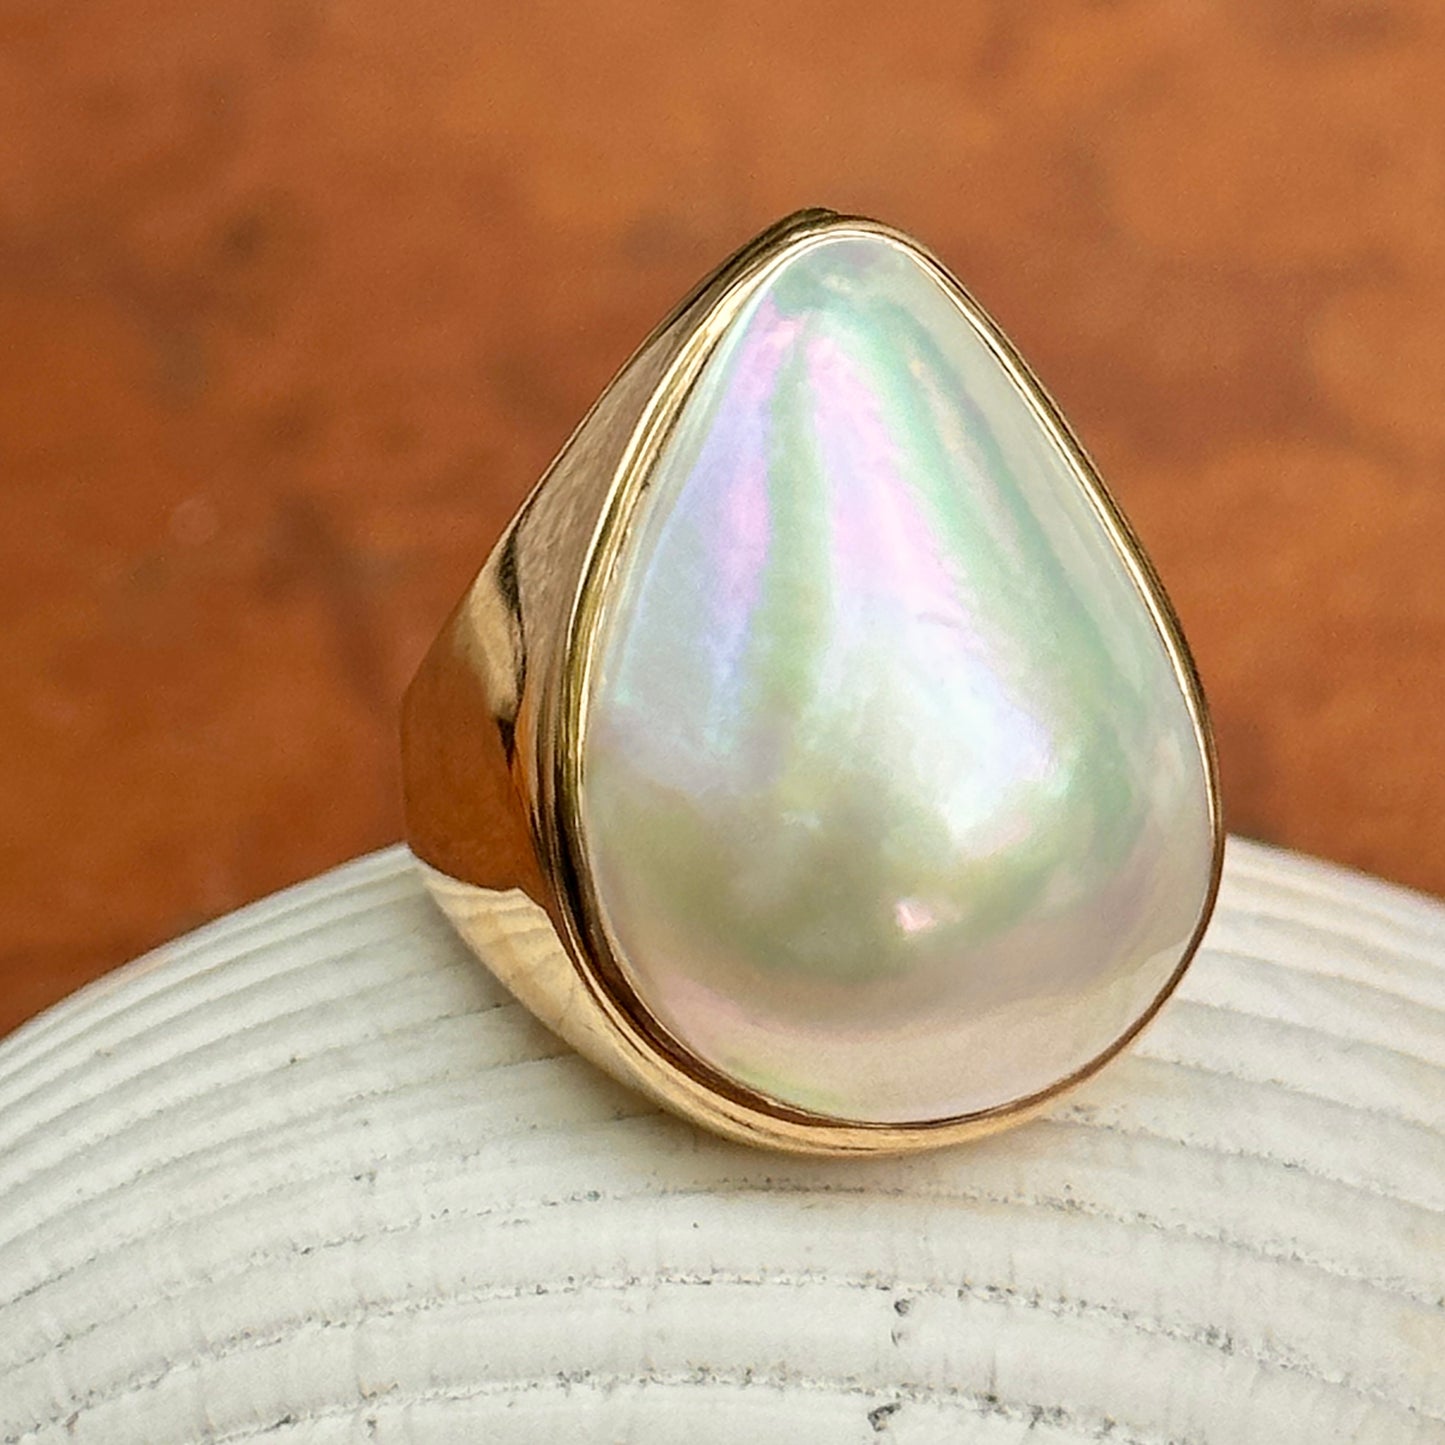 Estate 14KT Yellow Gold Large Pear Mabe Pearl Ring